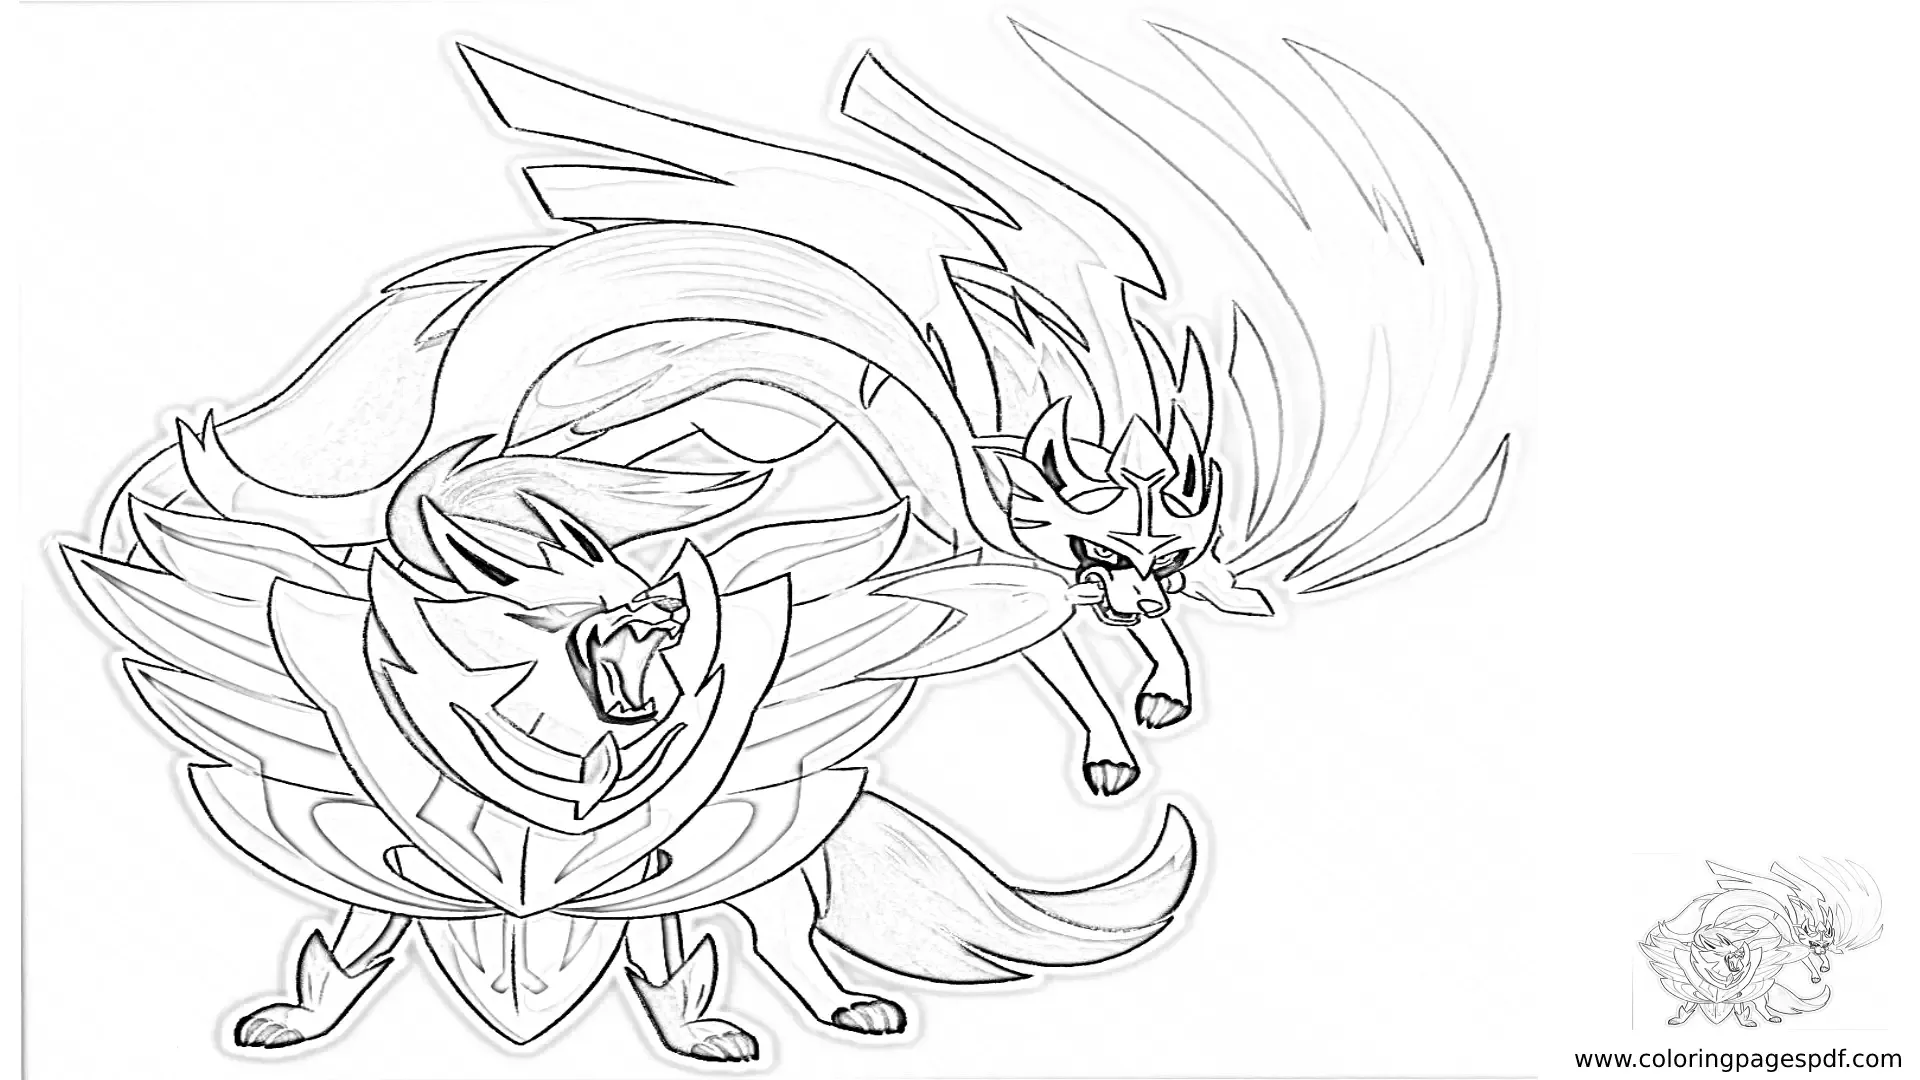 Coloring Page Of Angry Zacian Both Forms